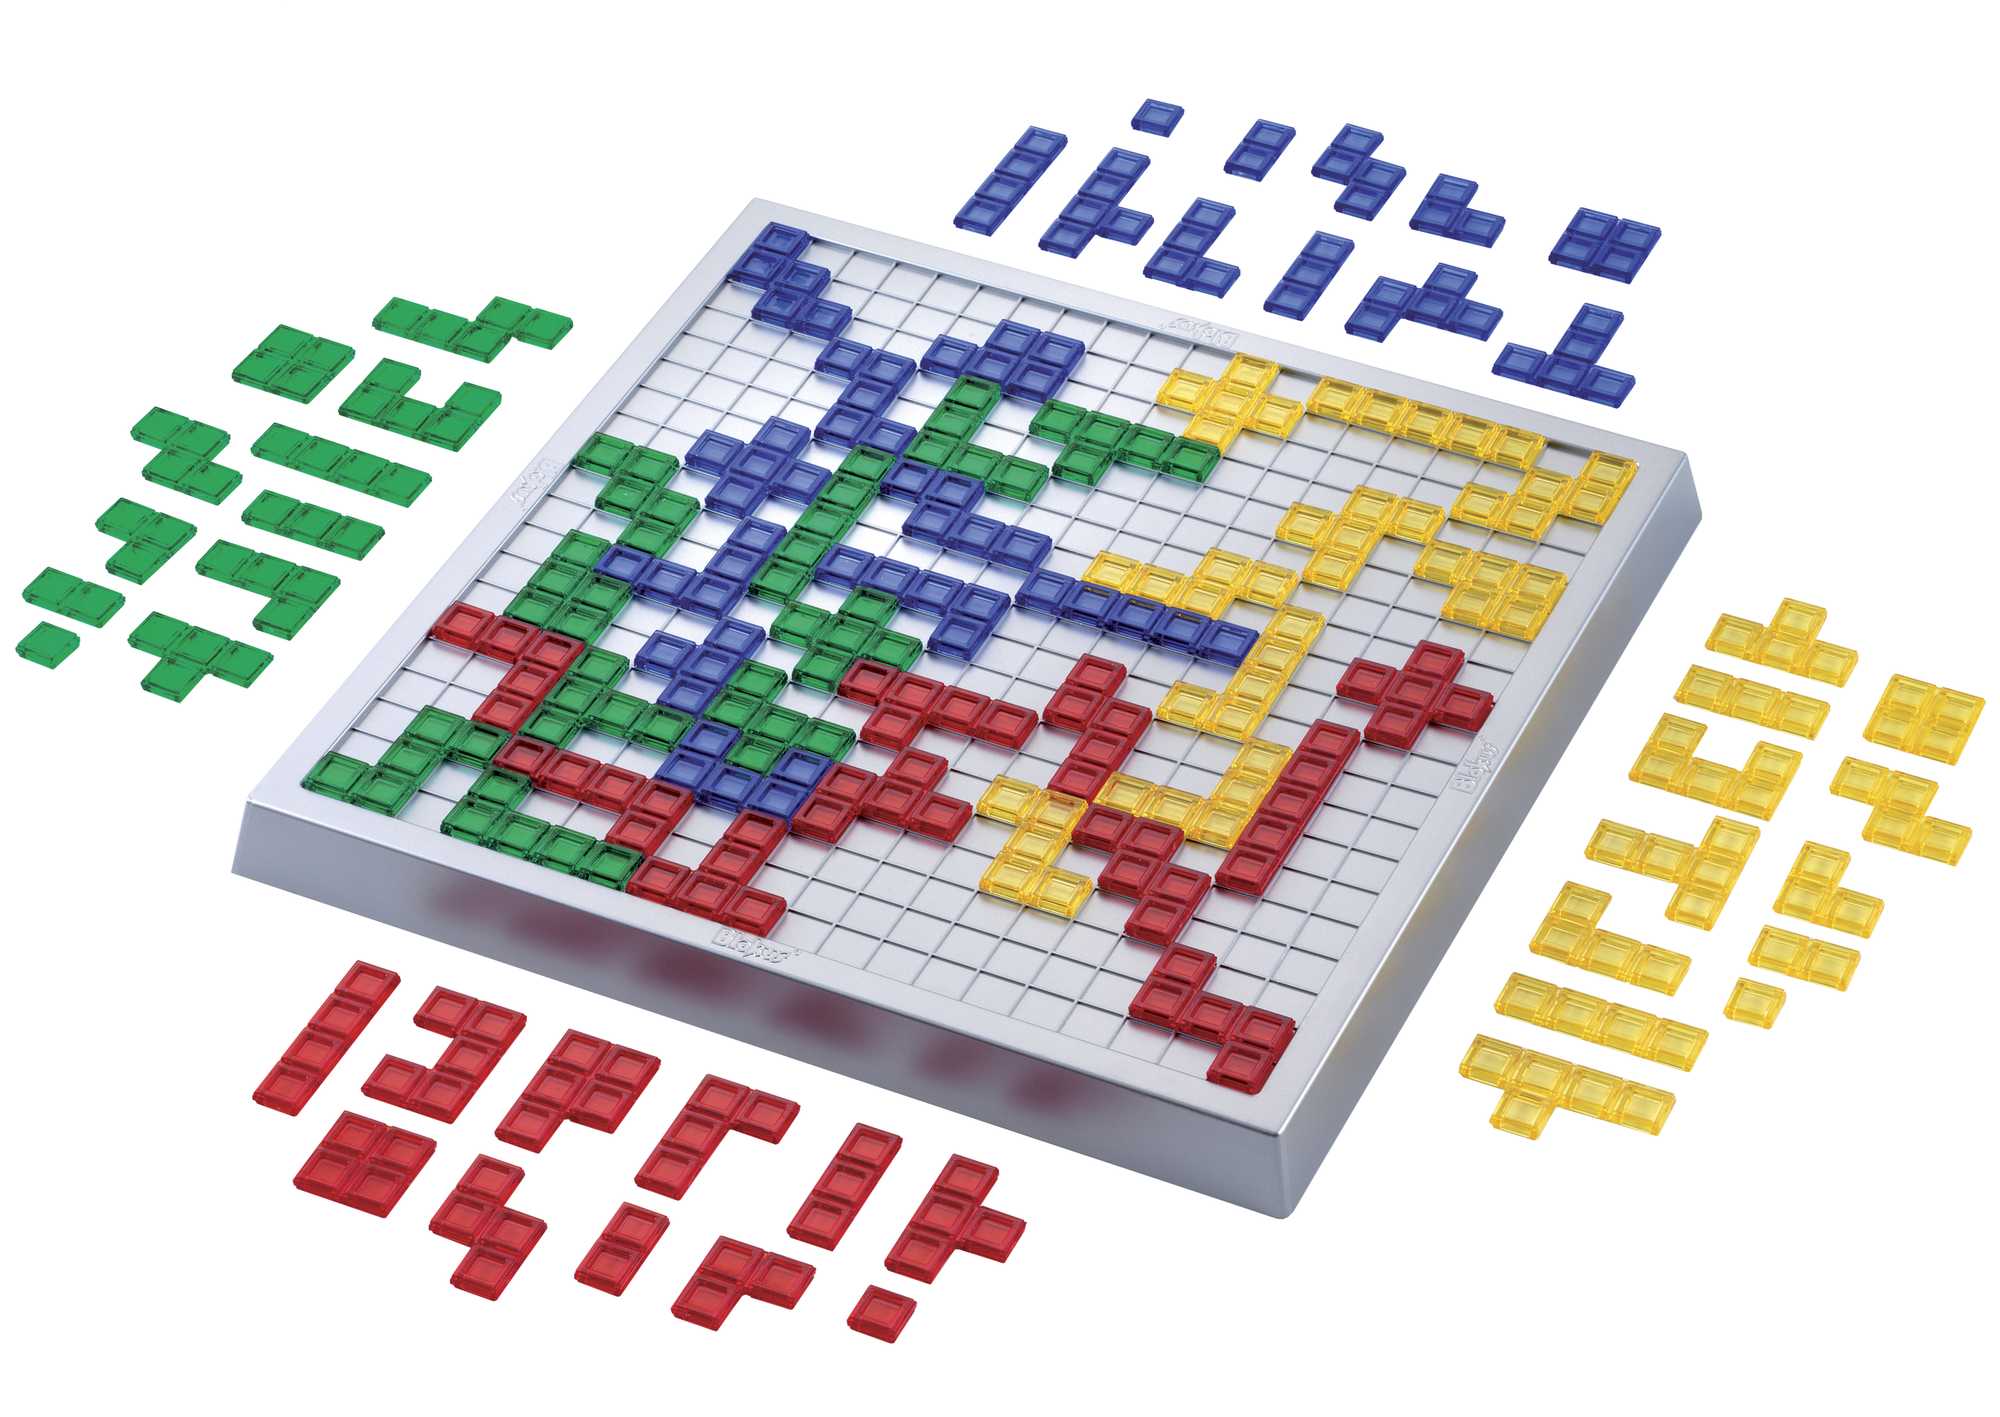 Blokus XL Family Board Games, Brain Games with Large Board and Pieces - image 2 of 6